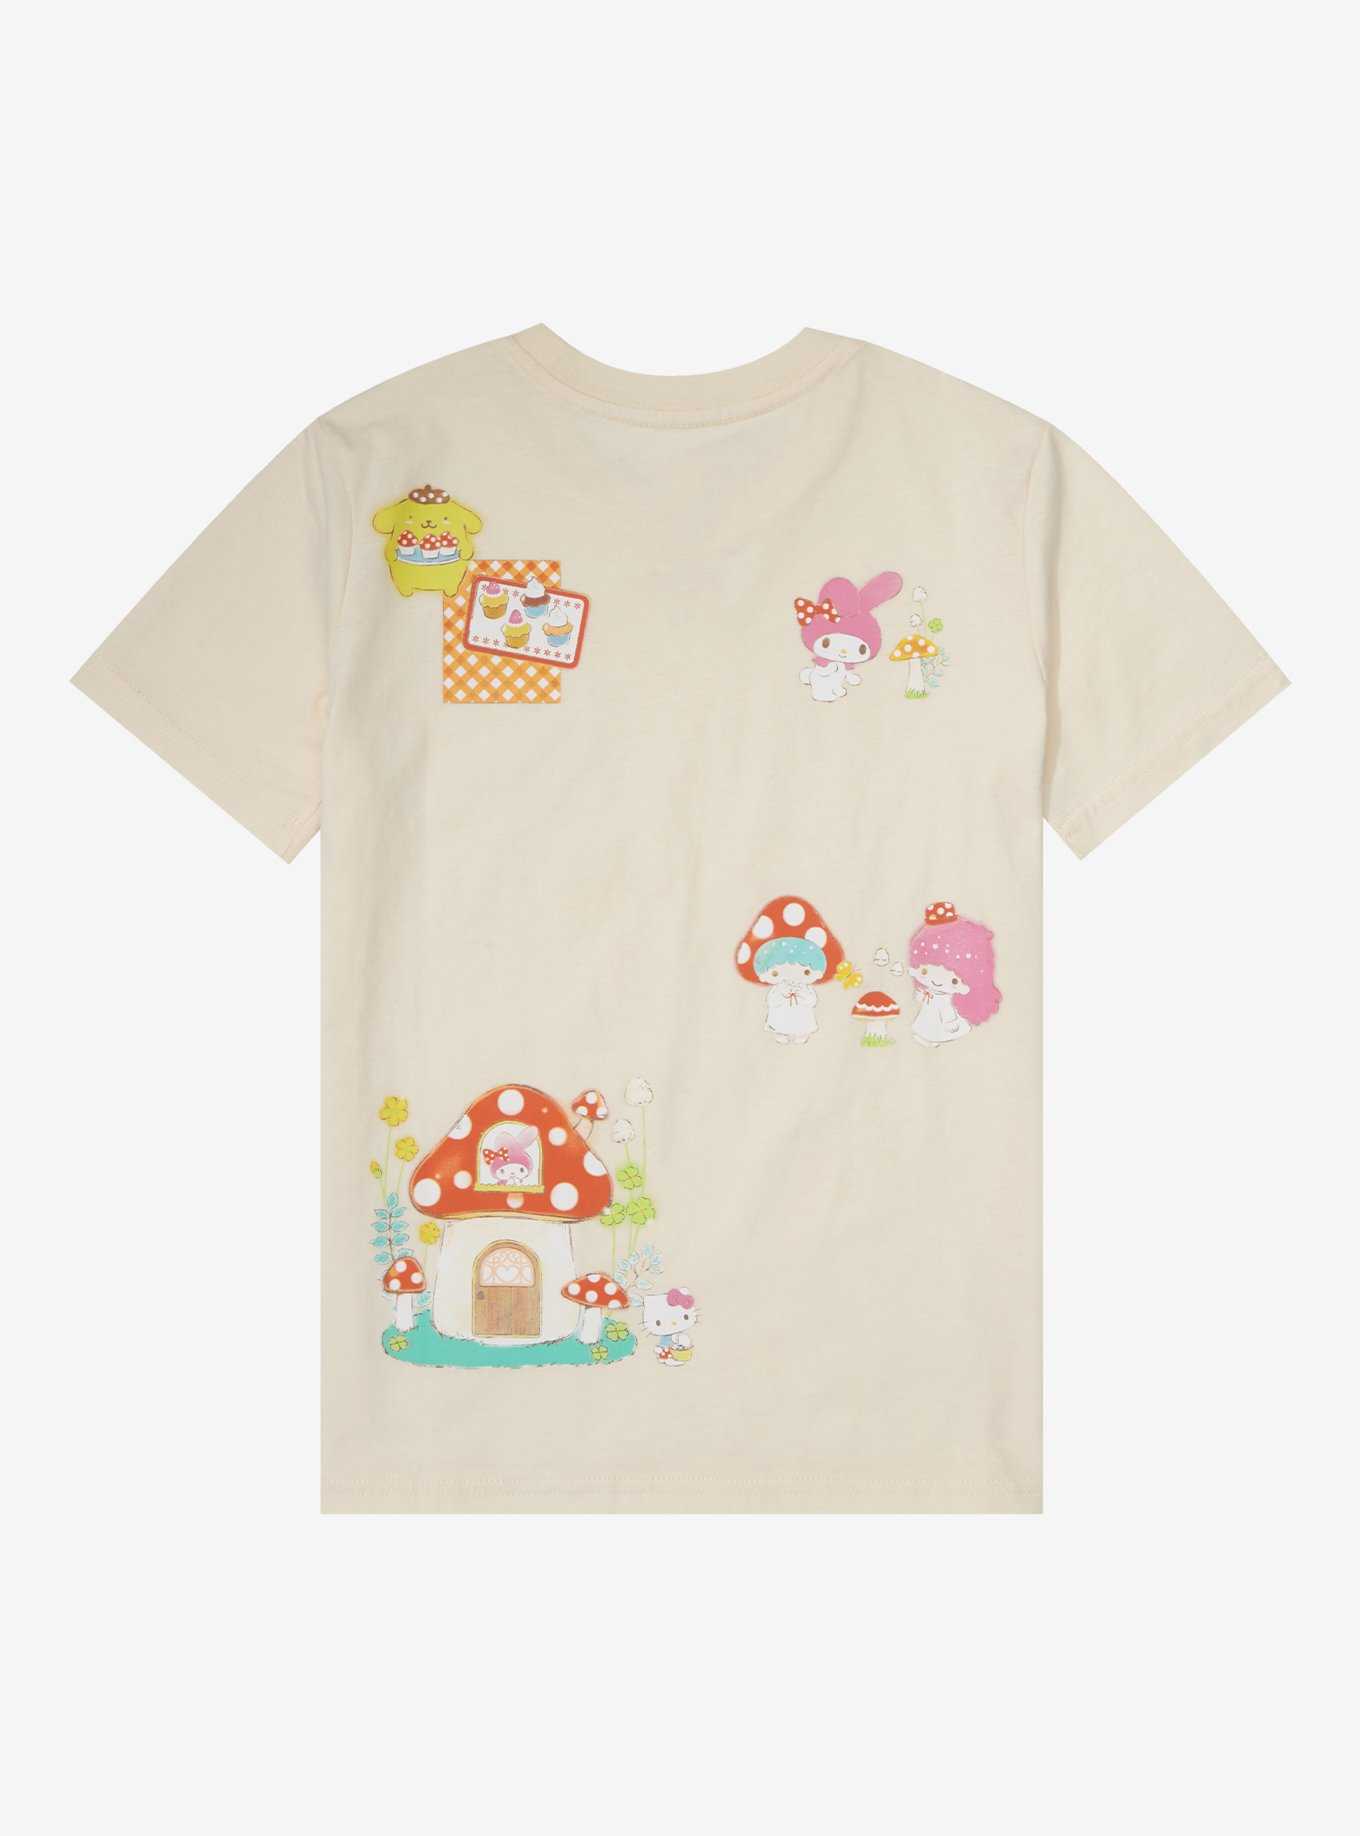 Sanrio Hello Kitty and Friends Mushroom Character Youth T-Shirt -  BoxLunch Exclusive, , hi-res